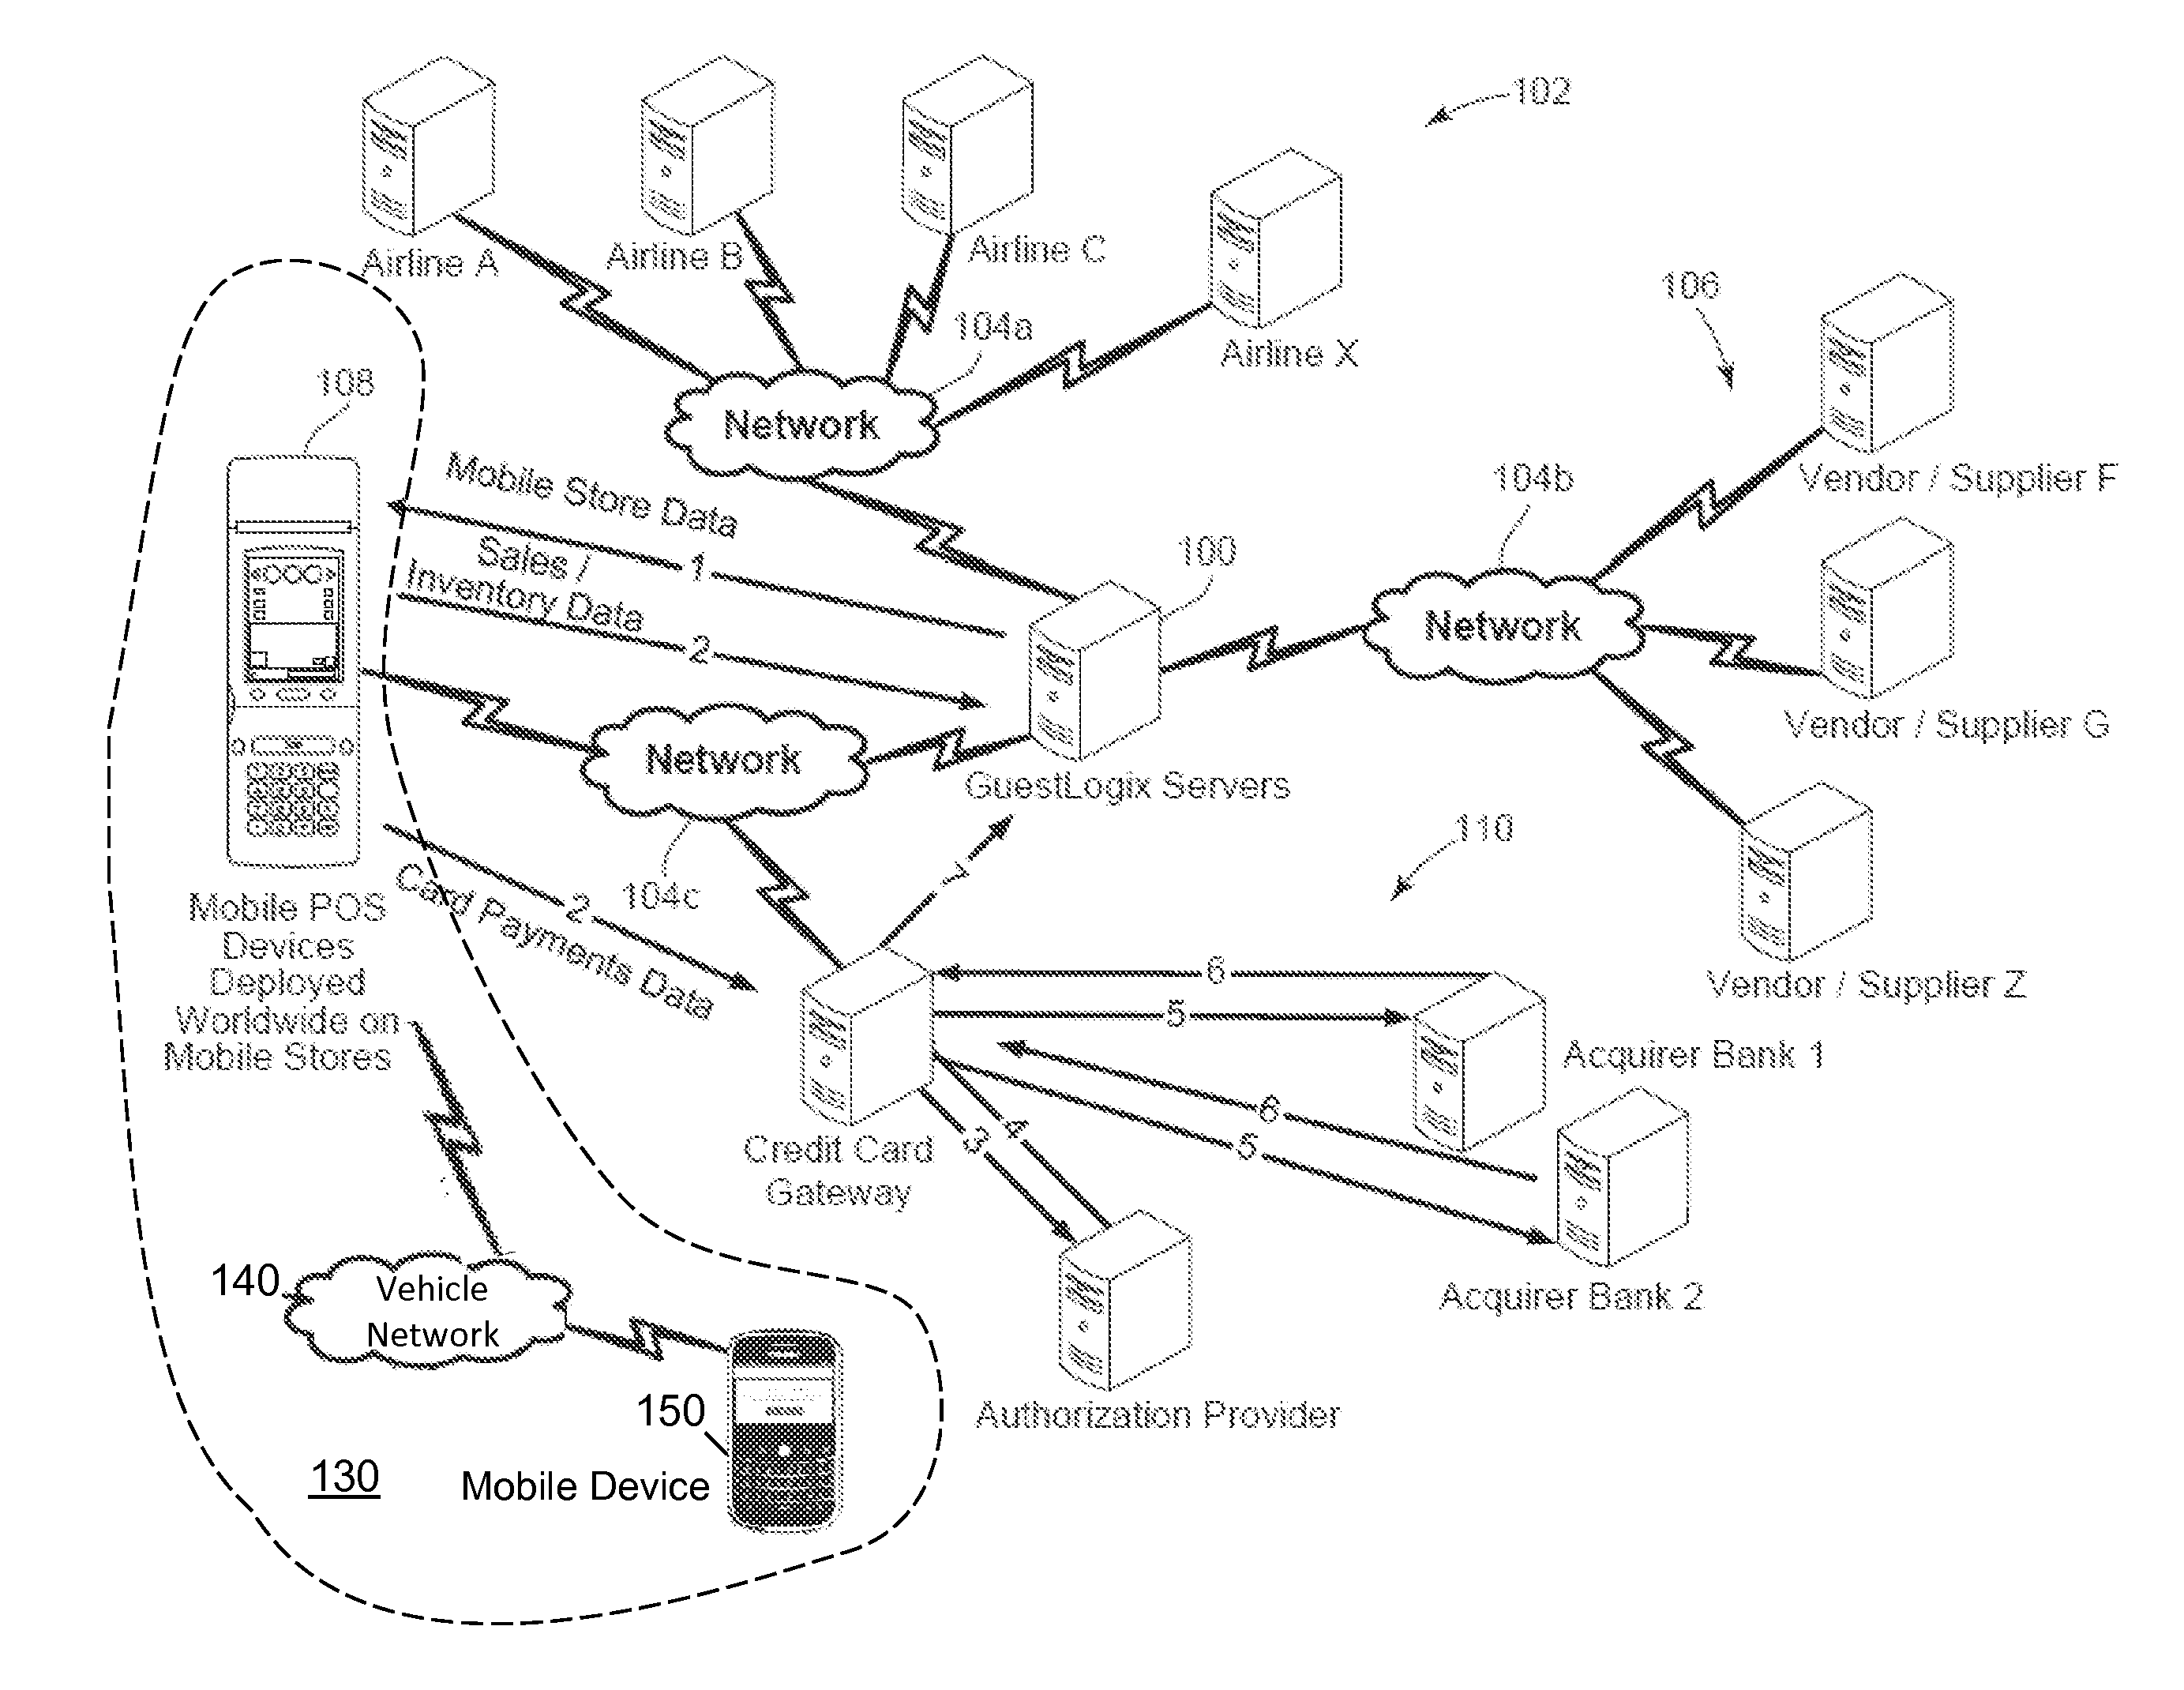 Systems and methods for integration of travel and related services and operations